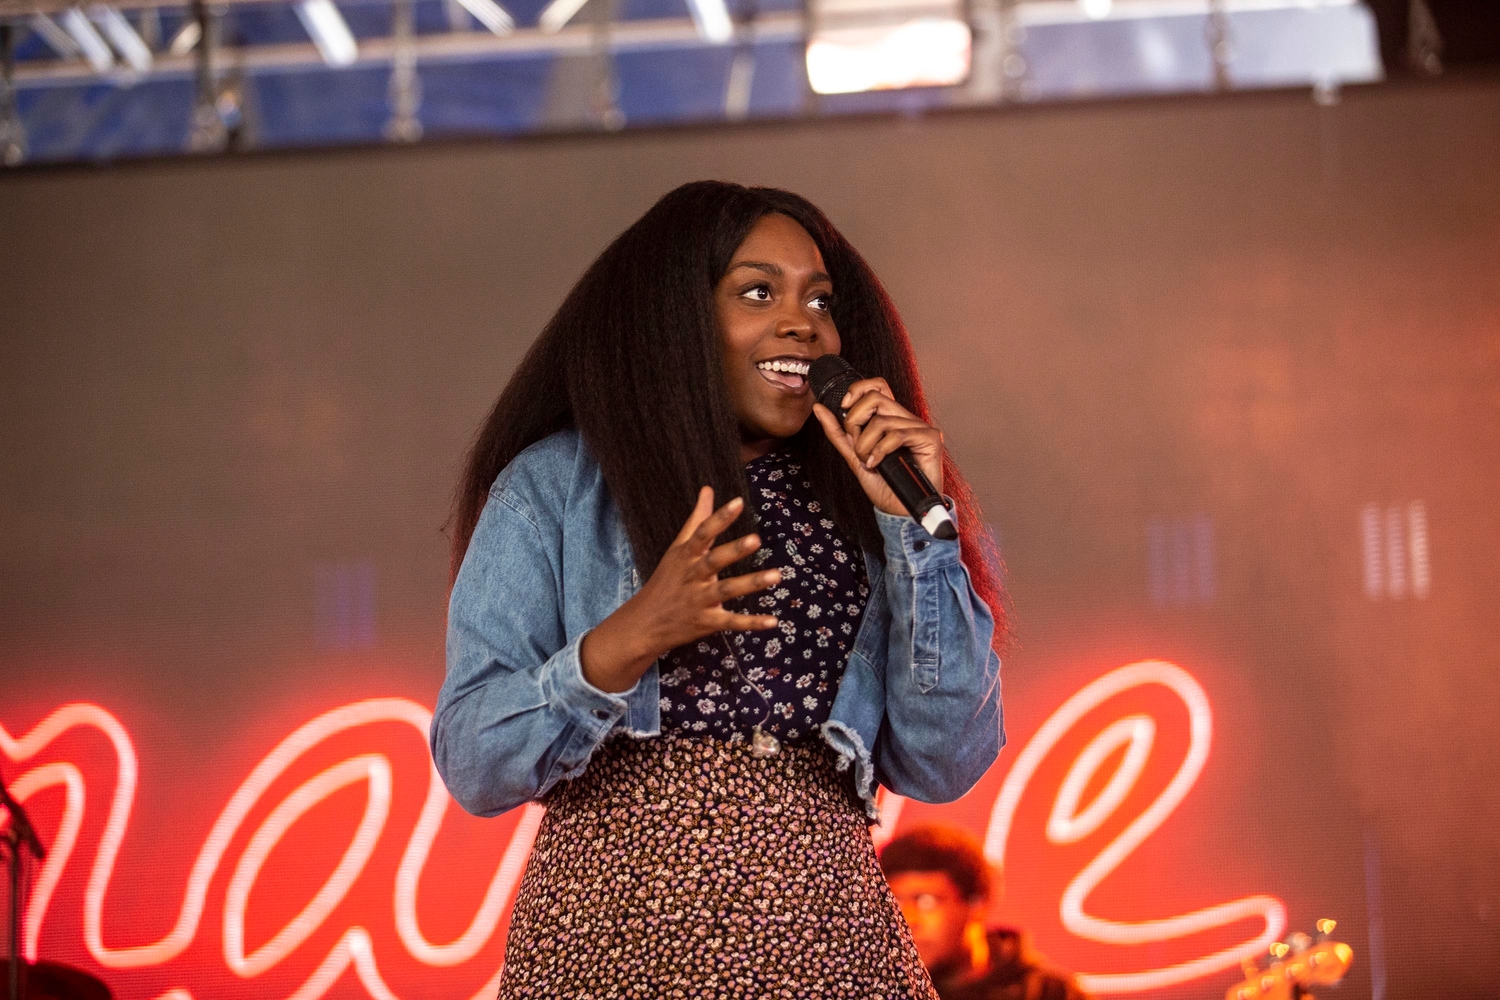 Noname’s new album ‘Room 25’ is coming this week!